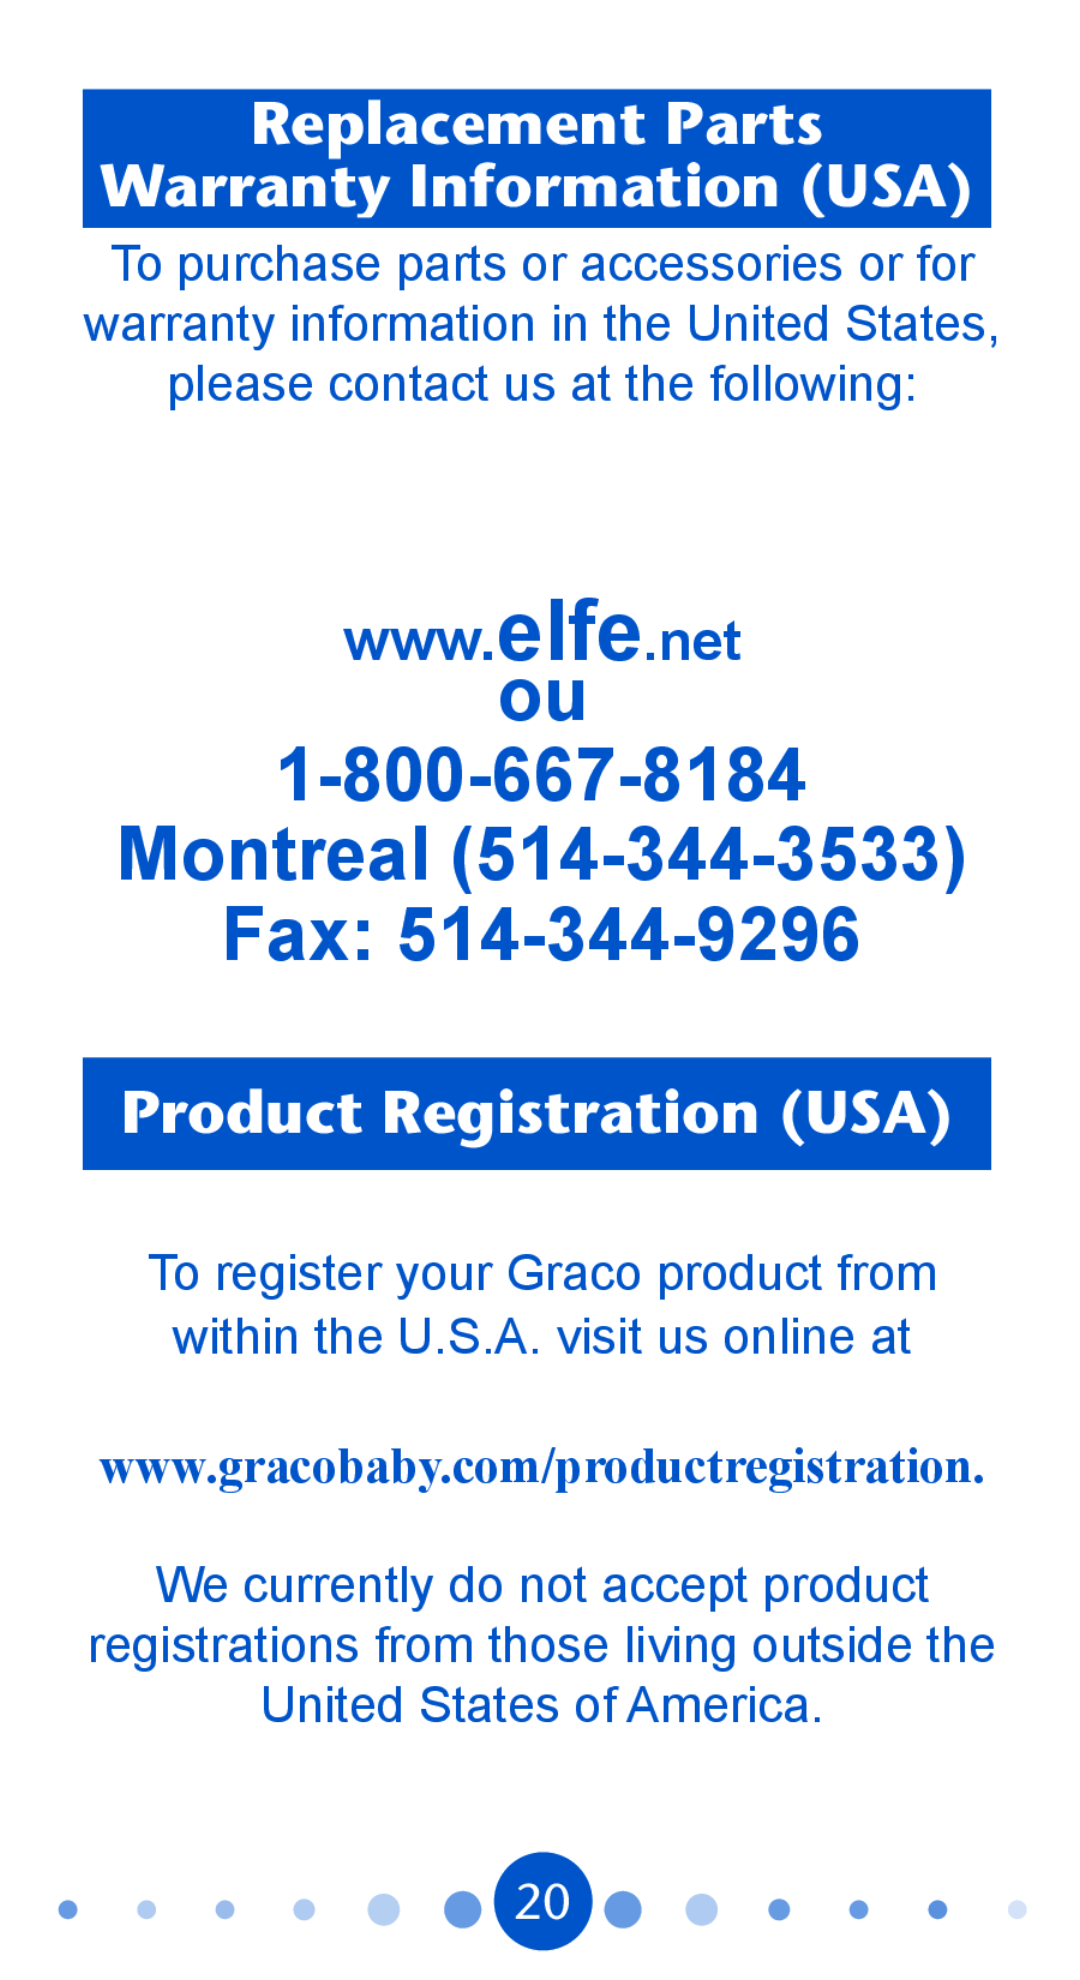 Graco PD104815A, 1750365 owner manual Montreal Fax, Replacement Parts Warranty Information USA, Product Registration USA 